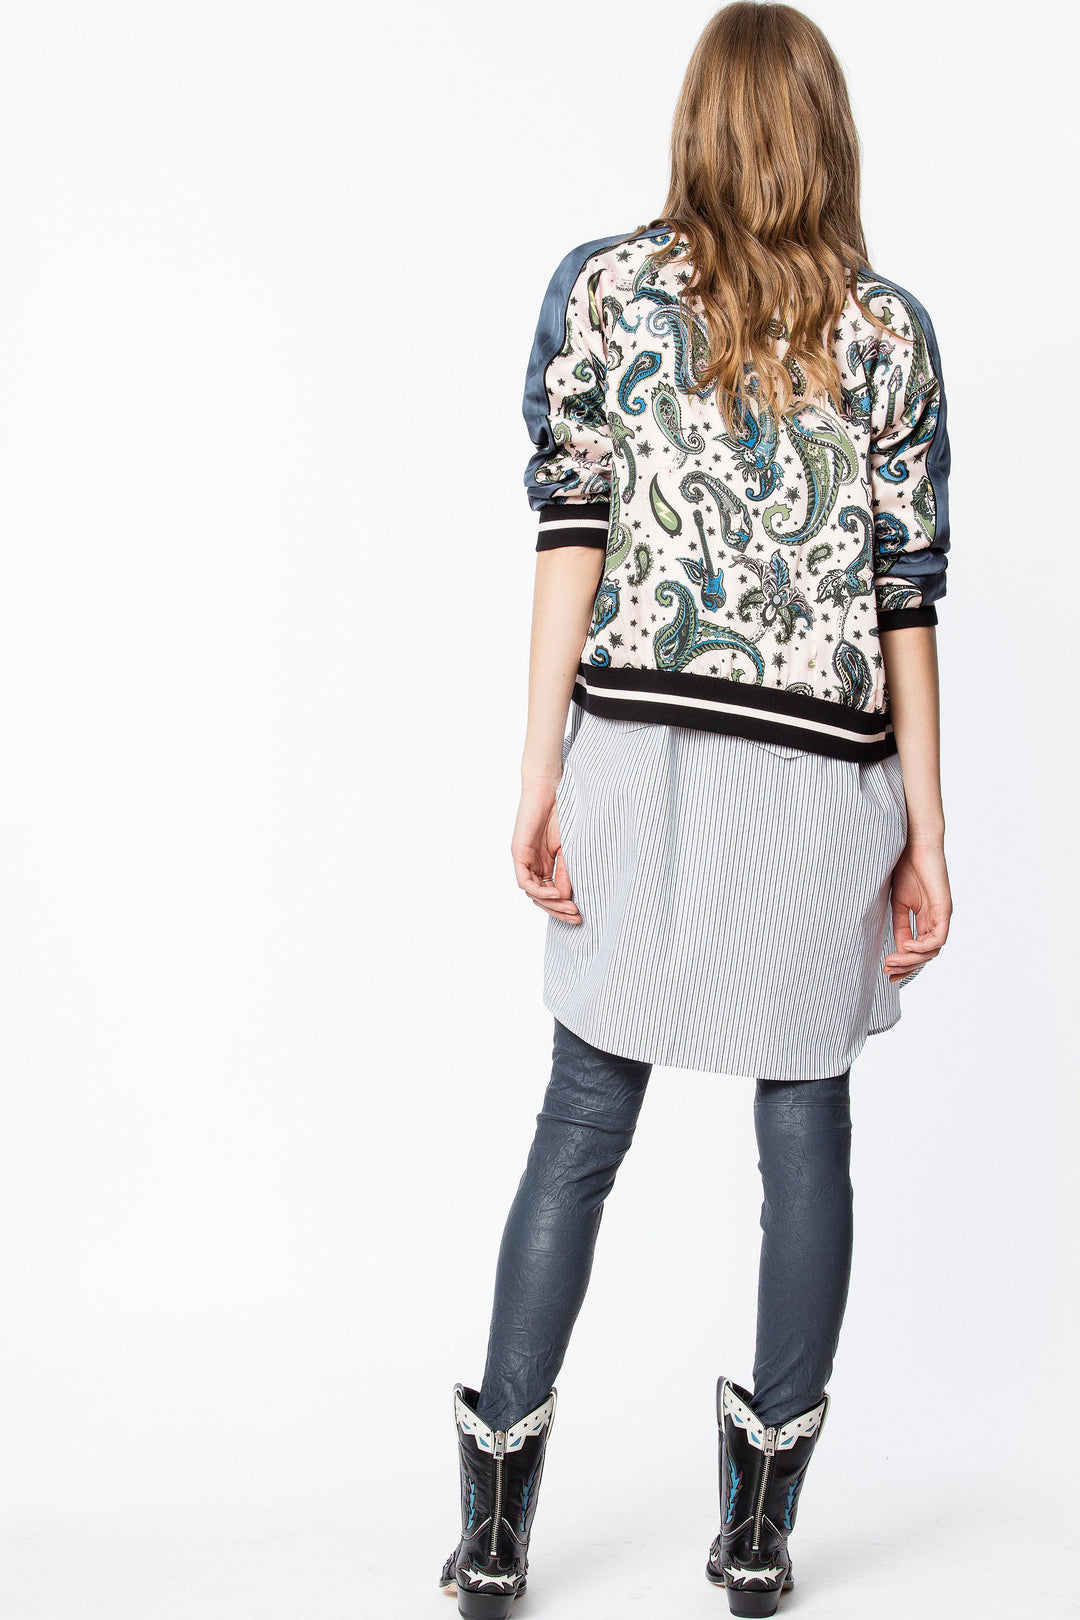 Zadig & Voltaire - Billy Reversible Bomber Jacket in Paisley Corolle